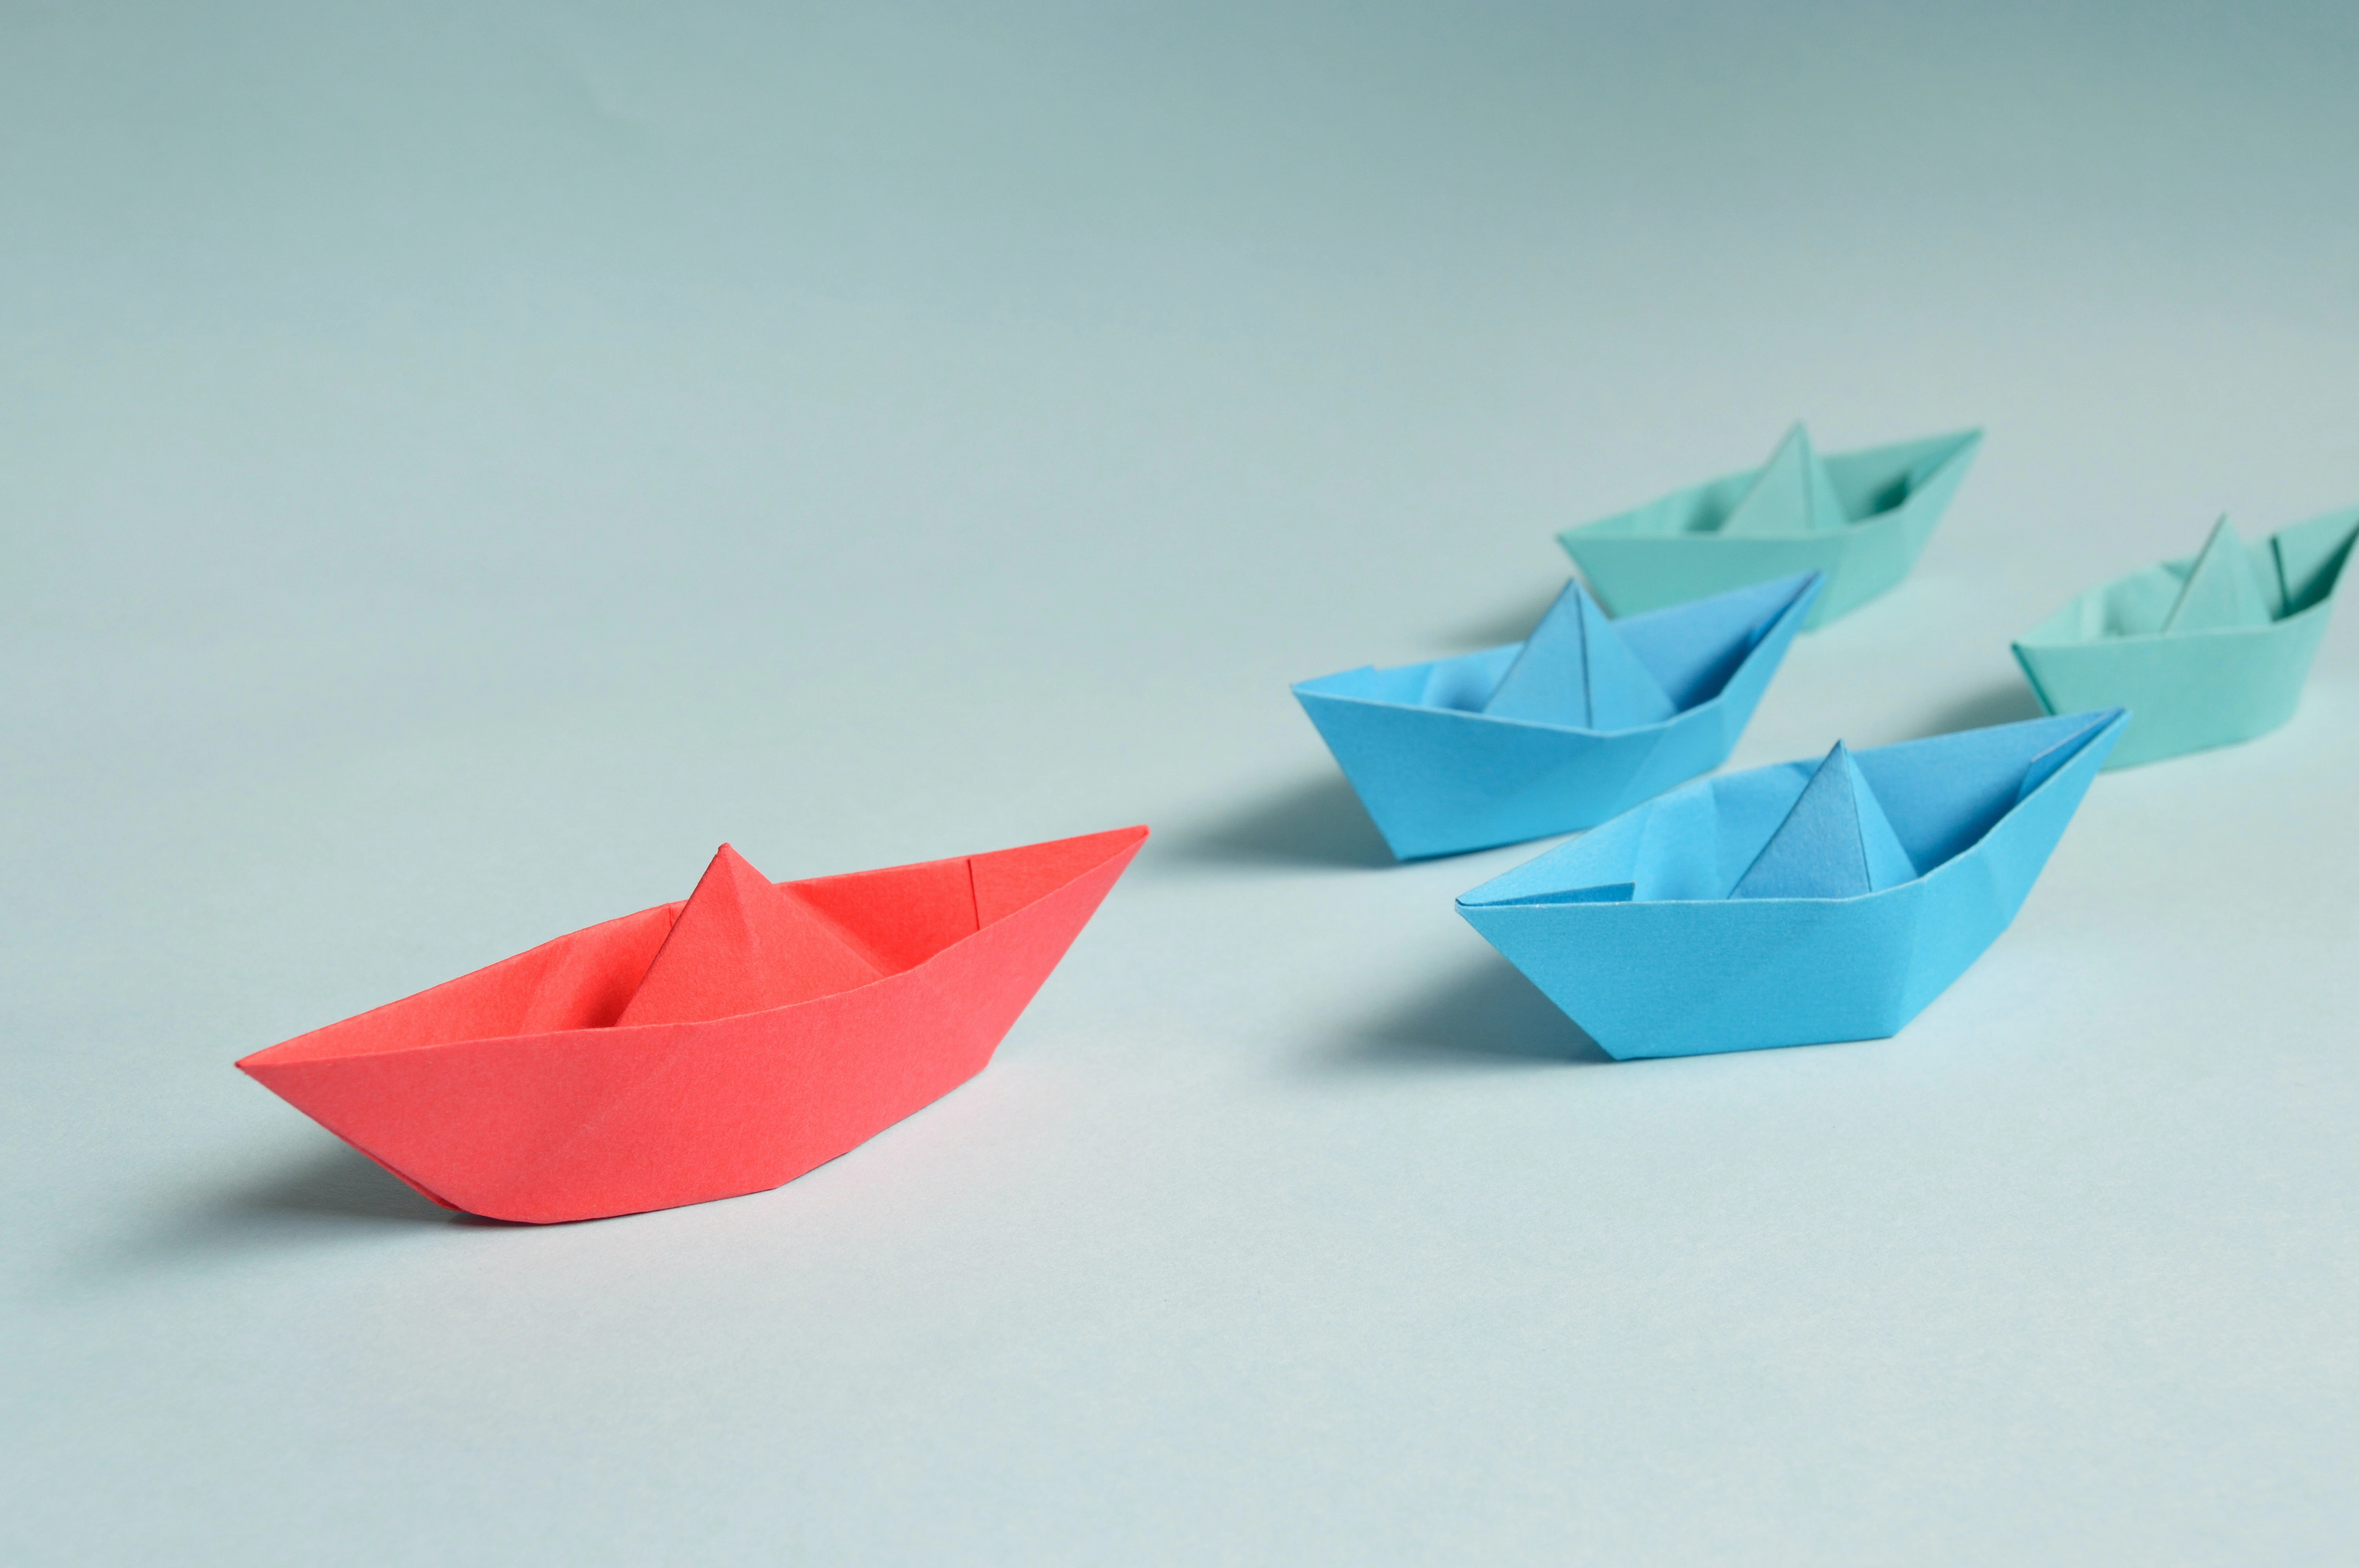 a photo of five paper boats on a white surface, with a red paper boat in lead.